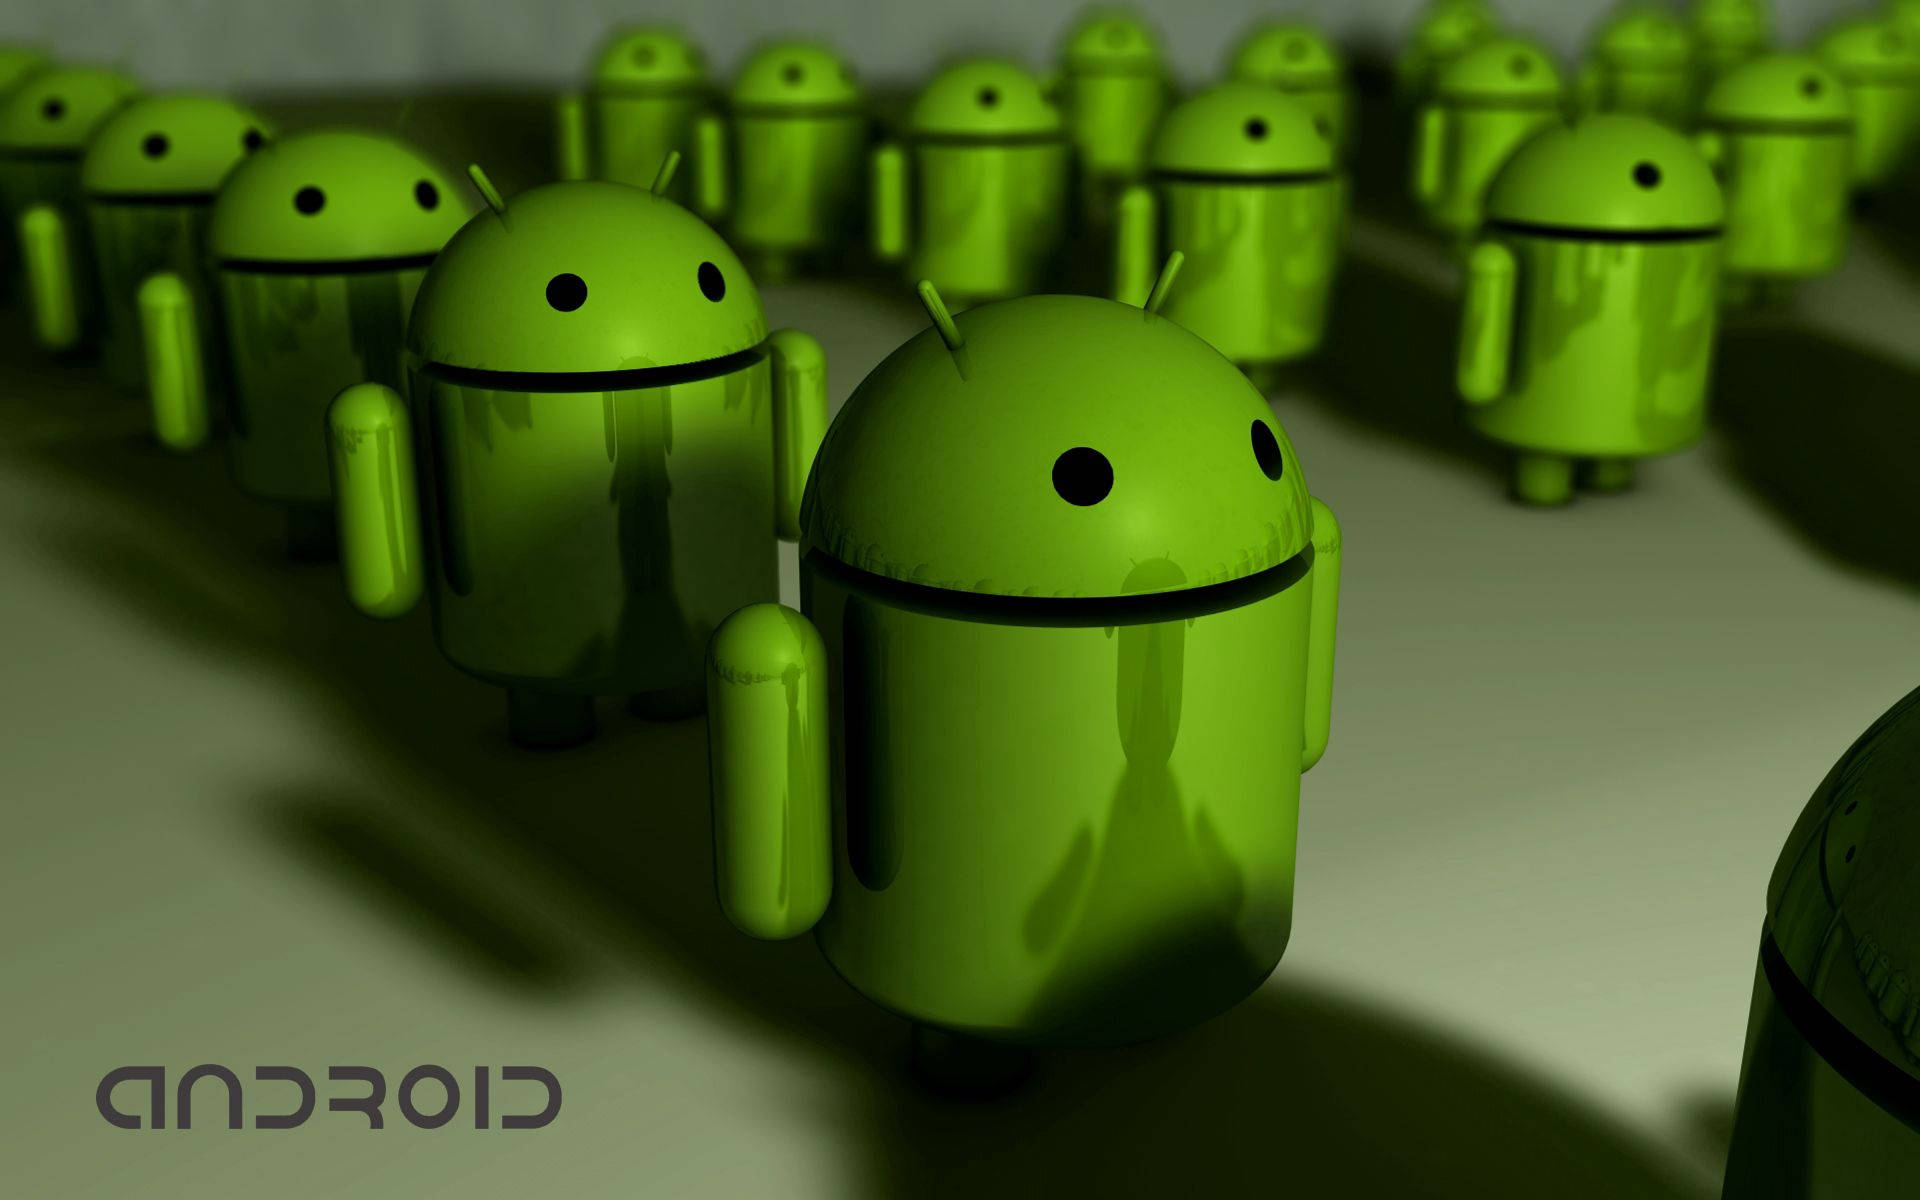 Welcome to the world of Android Wallpaper